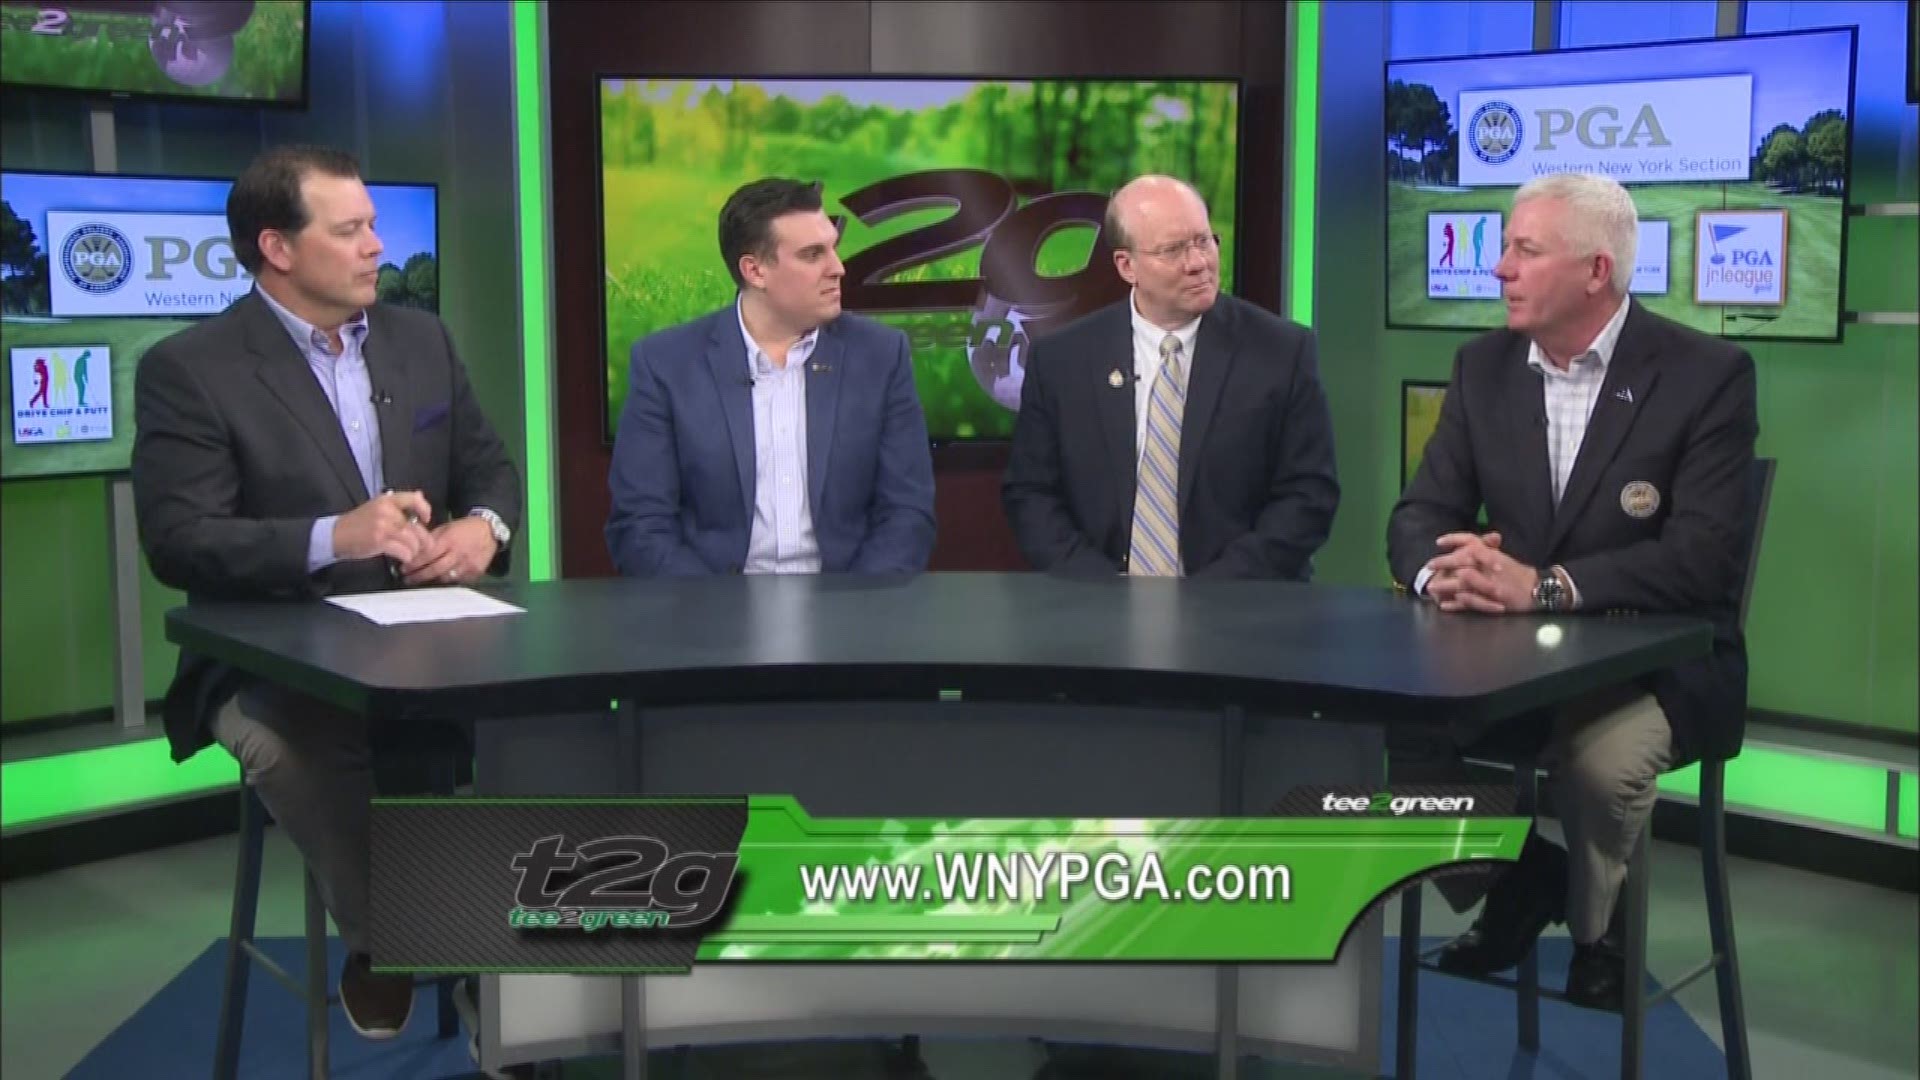 Kevin Sylvester sits down with Jeff Mietus , Steve Bartkowski, and Dan Antonucci to discuss how the PGA Western New York Section is always encouraging young people to get involved in the game of golf.